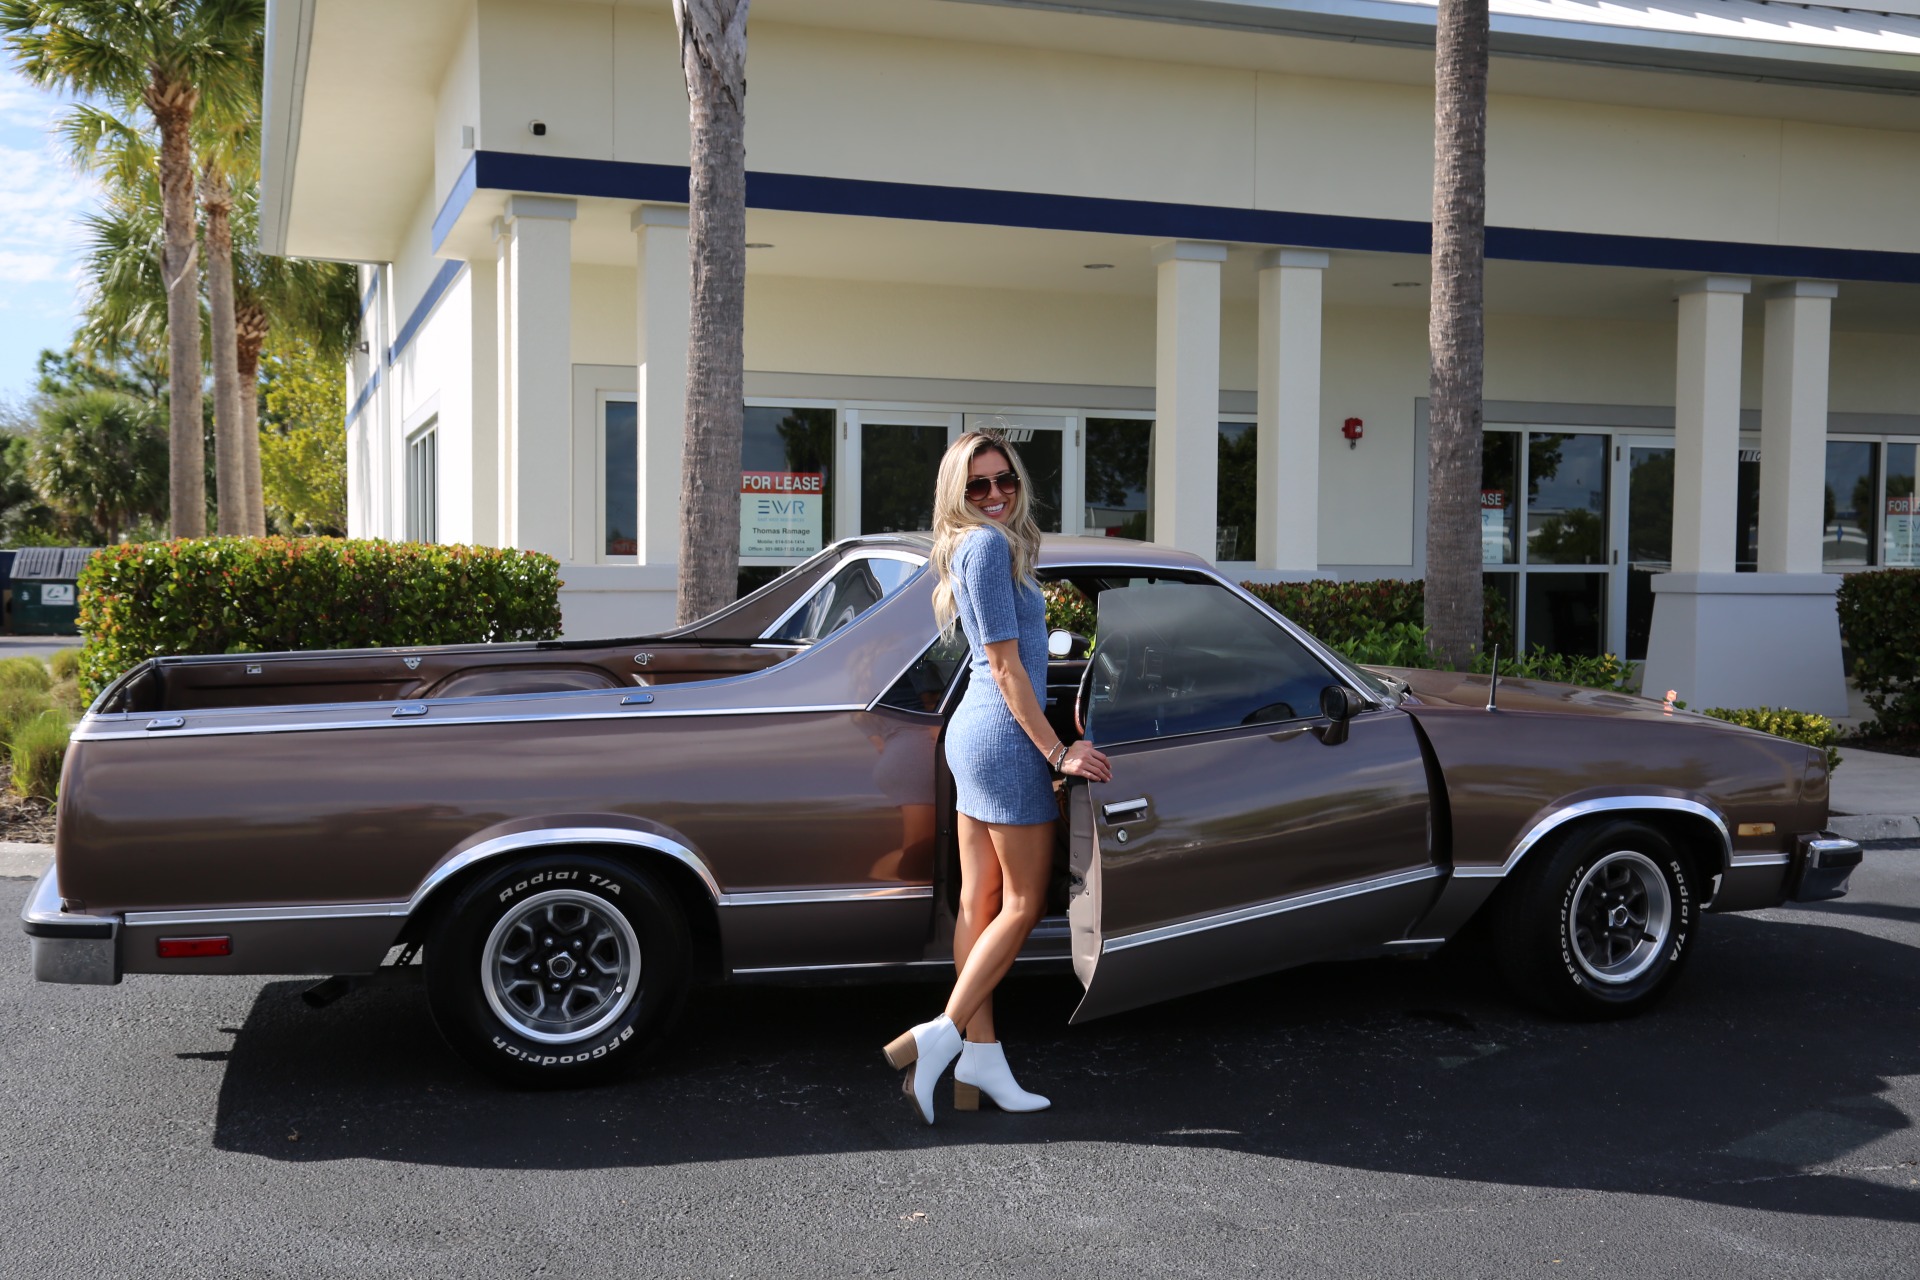 Used 1983 Chevrolet El Camino for sale Sold at Muscle Cars for Sale Inc. in Fort Myers FL 33912 8